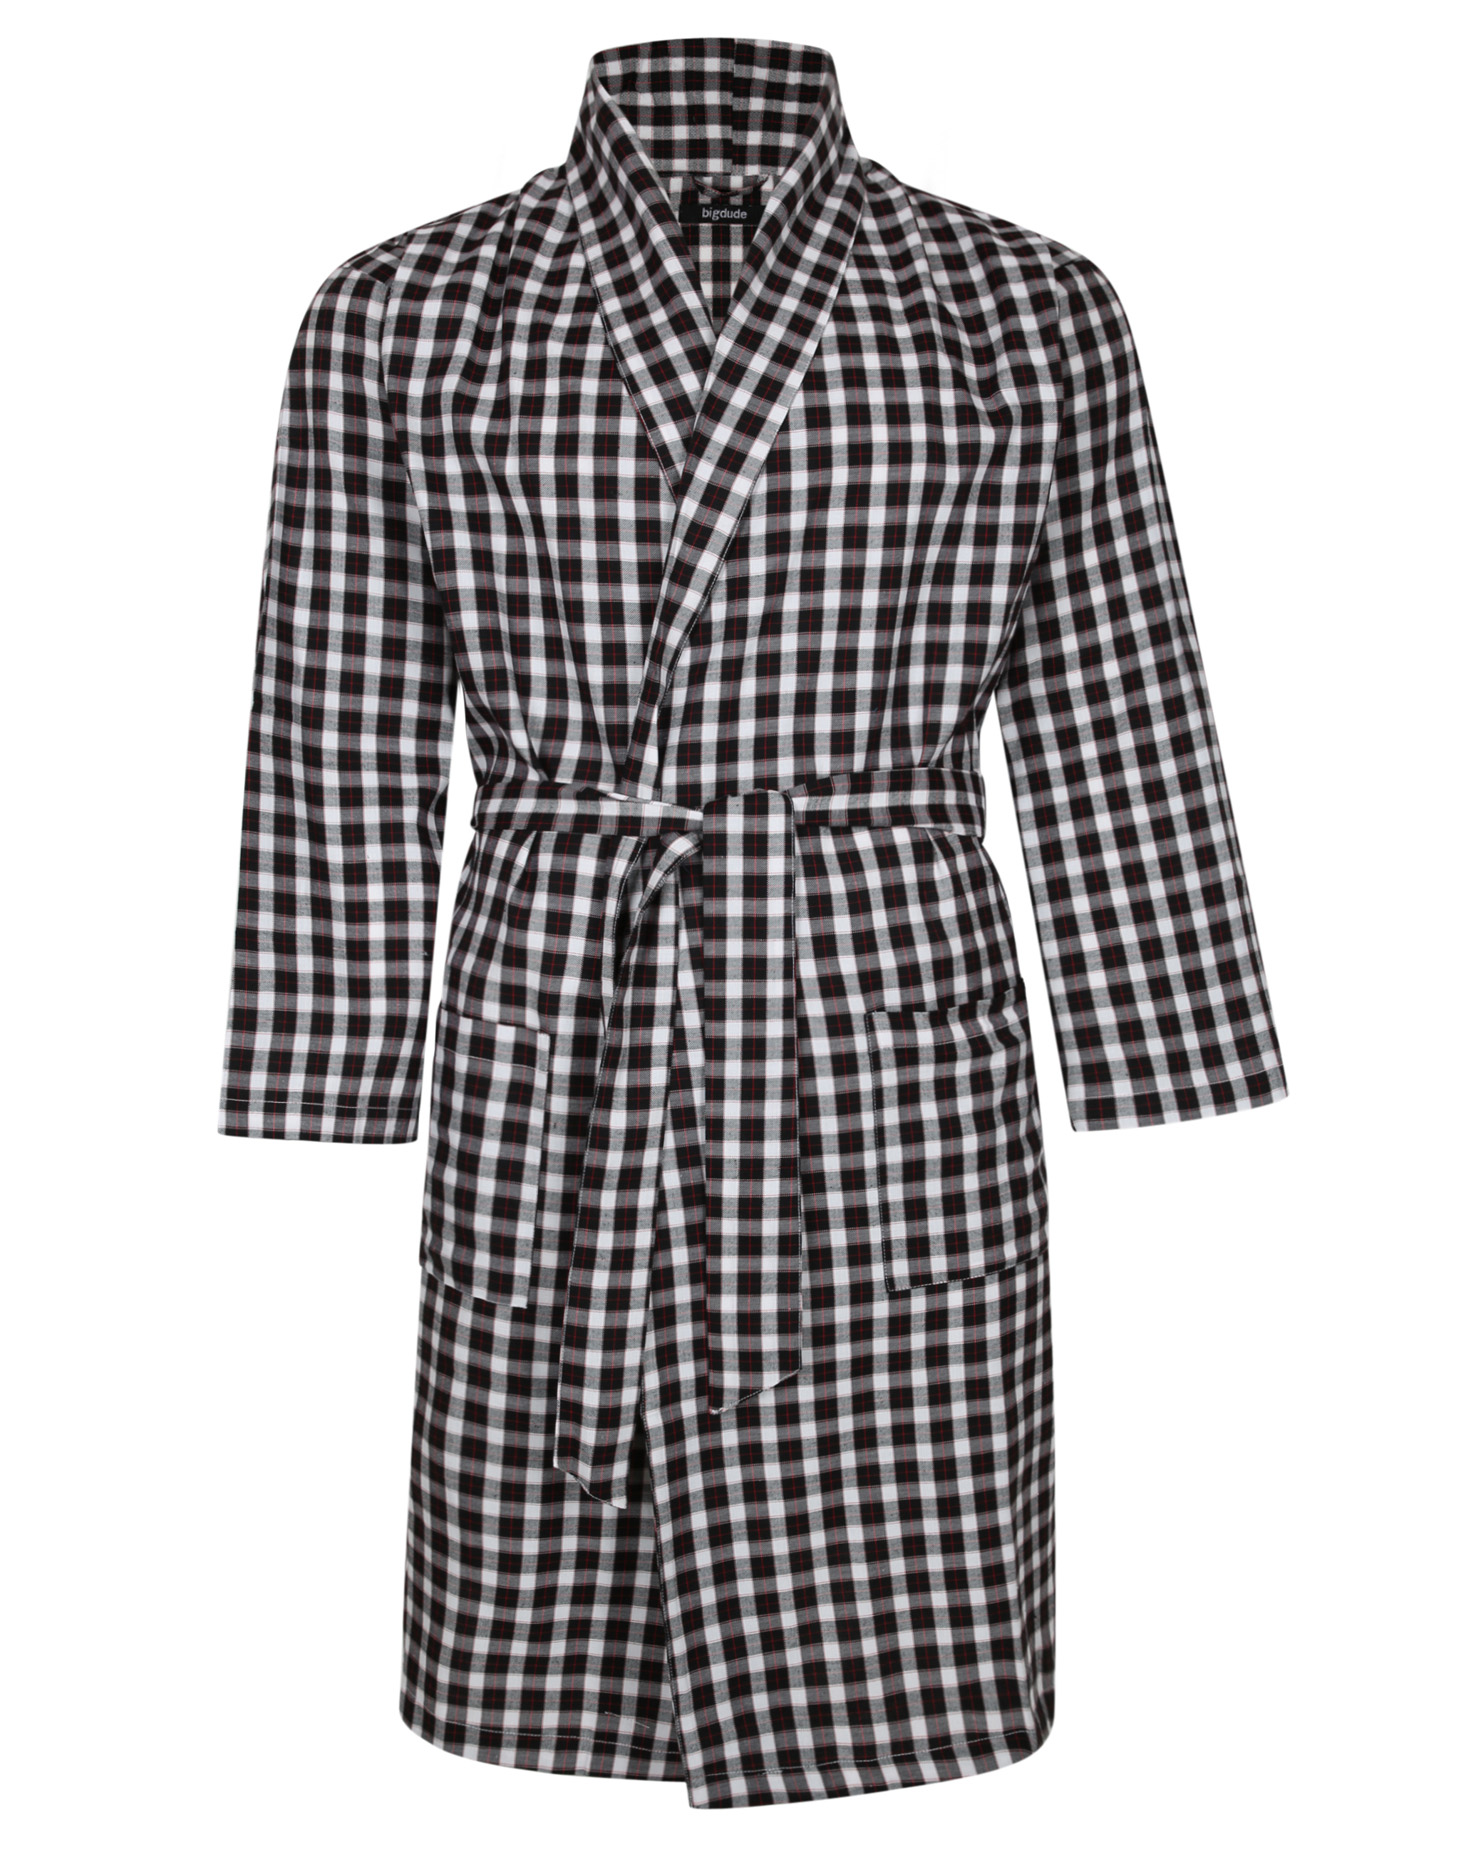 Rael Brook Dressing Gown Blue/White Check 